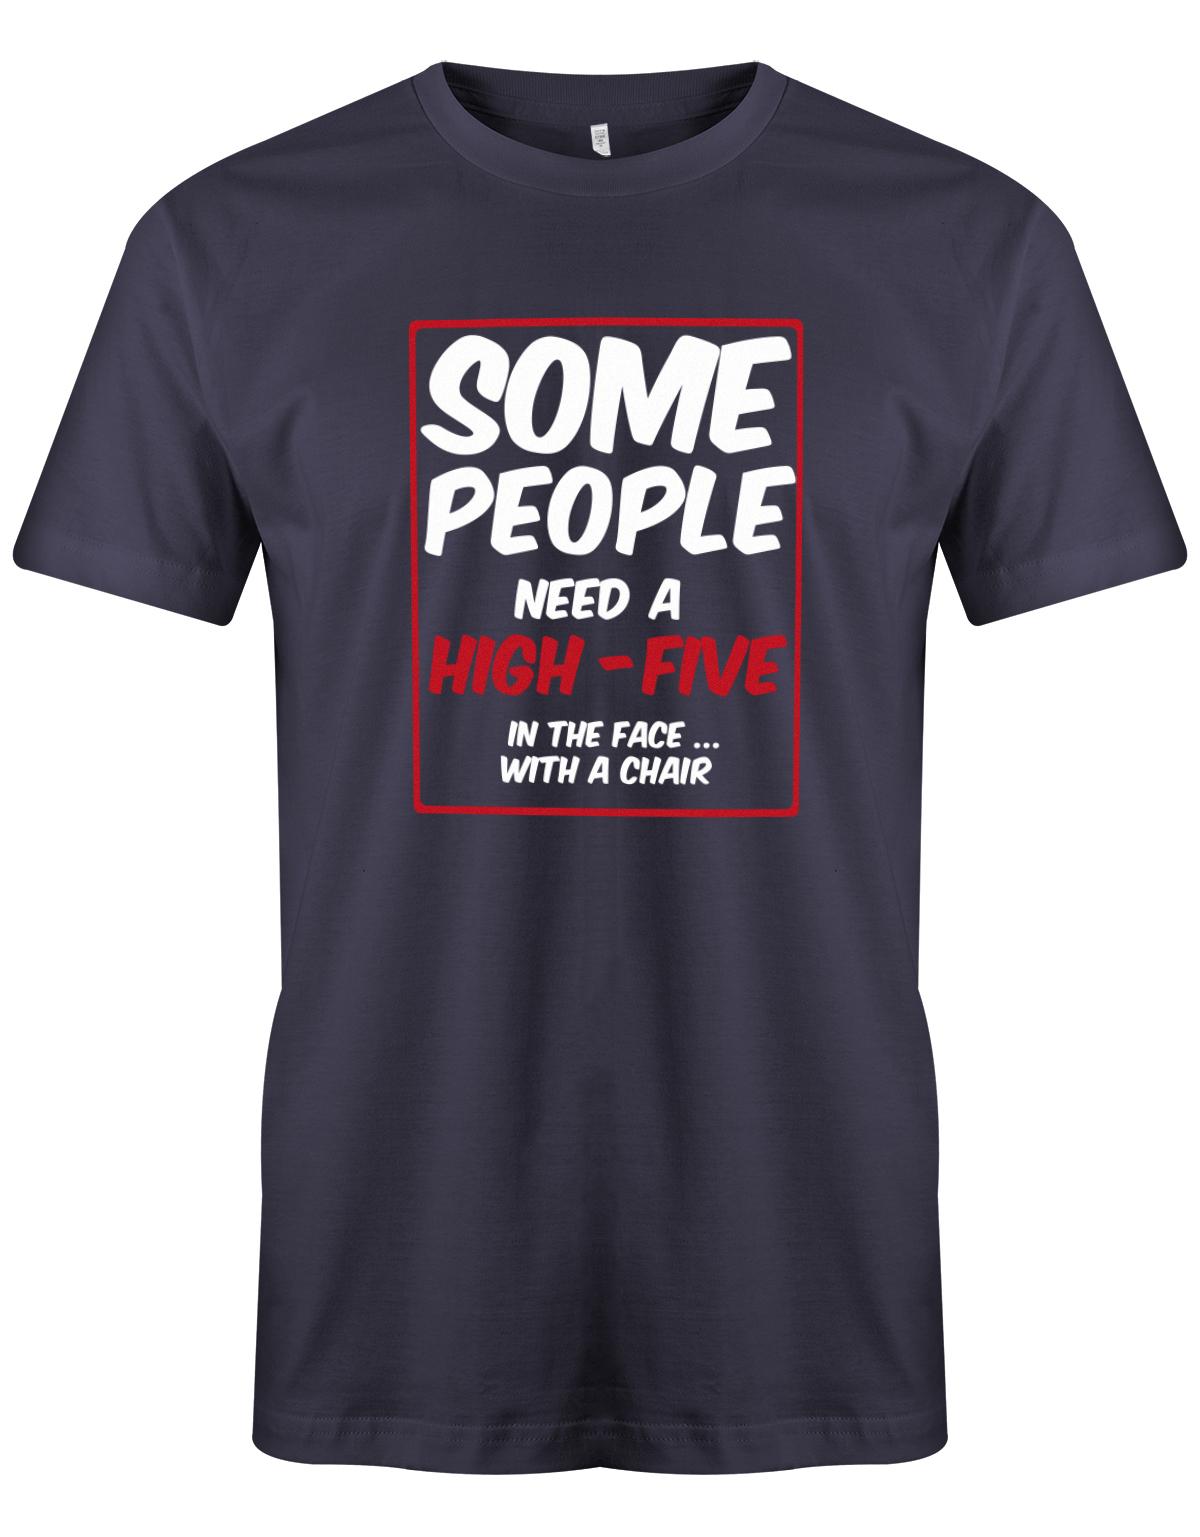 Some-People-need-a-High-Five-In-the-Face-with-a-Chair-Herren-Shirt-Navy